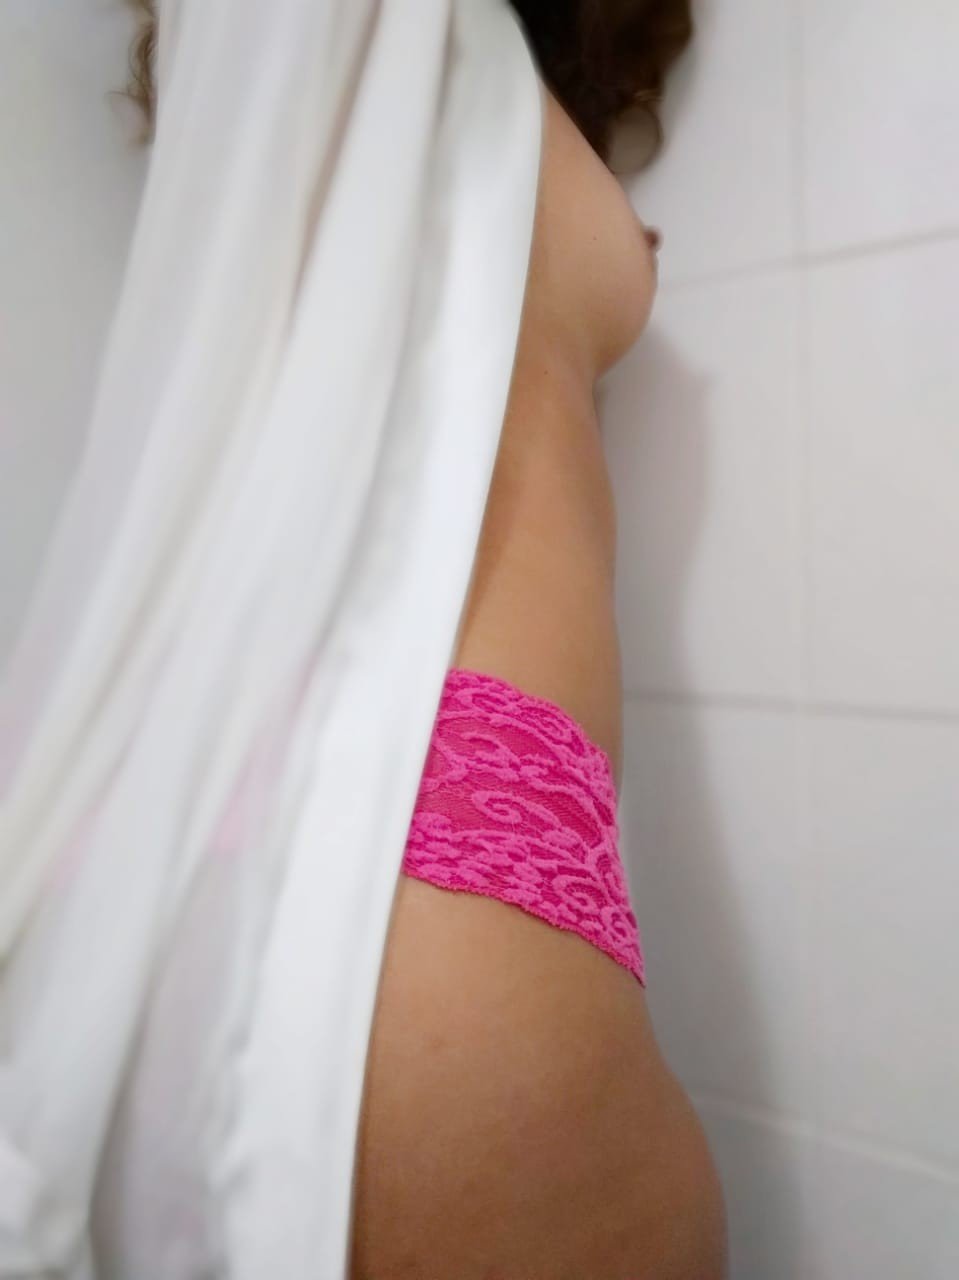 Photo by Queremos te provar! with the username @queremosteprovar, who is a verified user,  May 5, 2019 at 2:26 AM. The post is about the topic Bra/Panty/Lingerie/Bikini and the text says 'Undressing..'